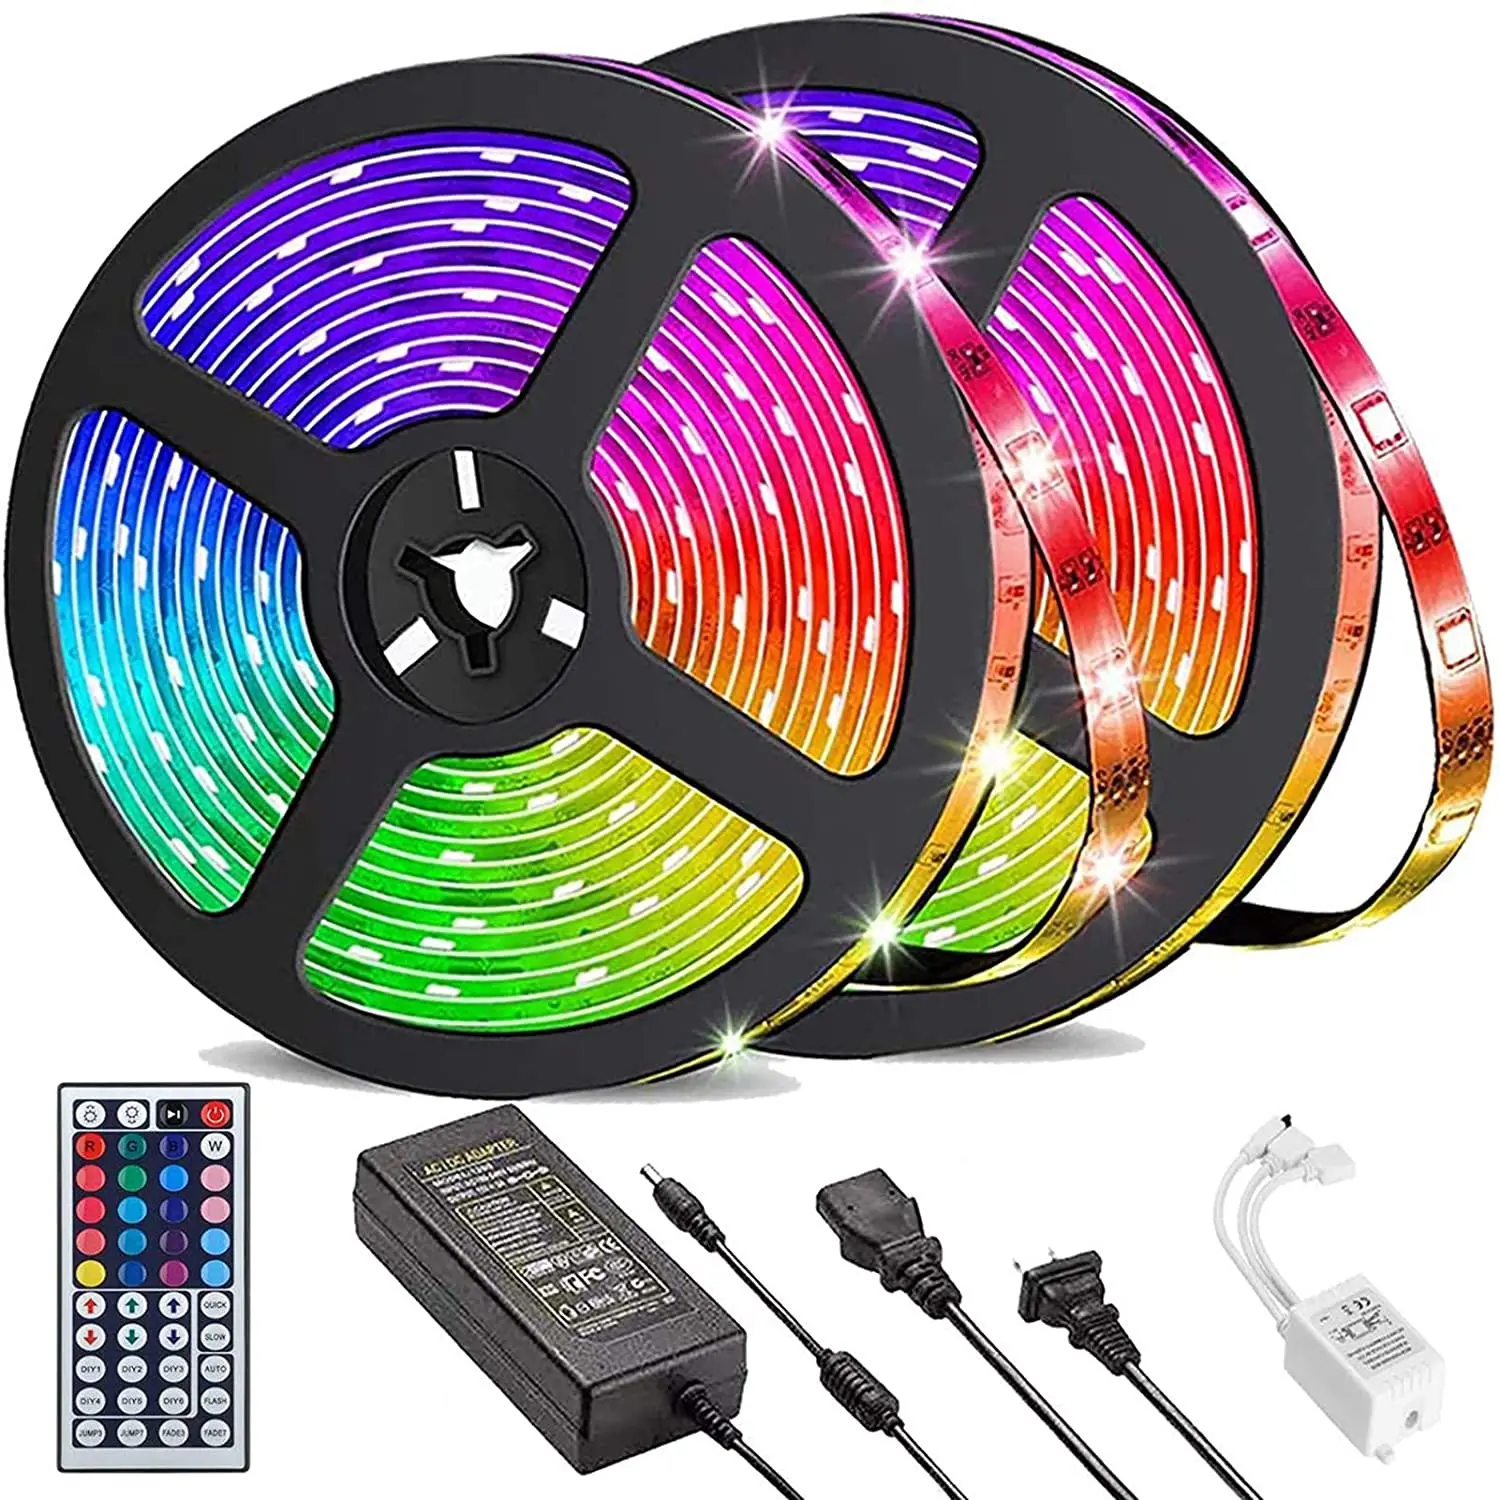 

LED Strip Lights 32.8ft Waterproof Light Strips with IR Remote Control 10m Color Changing 5050 RGB 300 LEDs Flexible Tape Lights